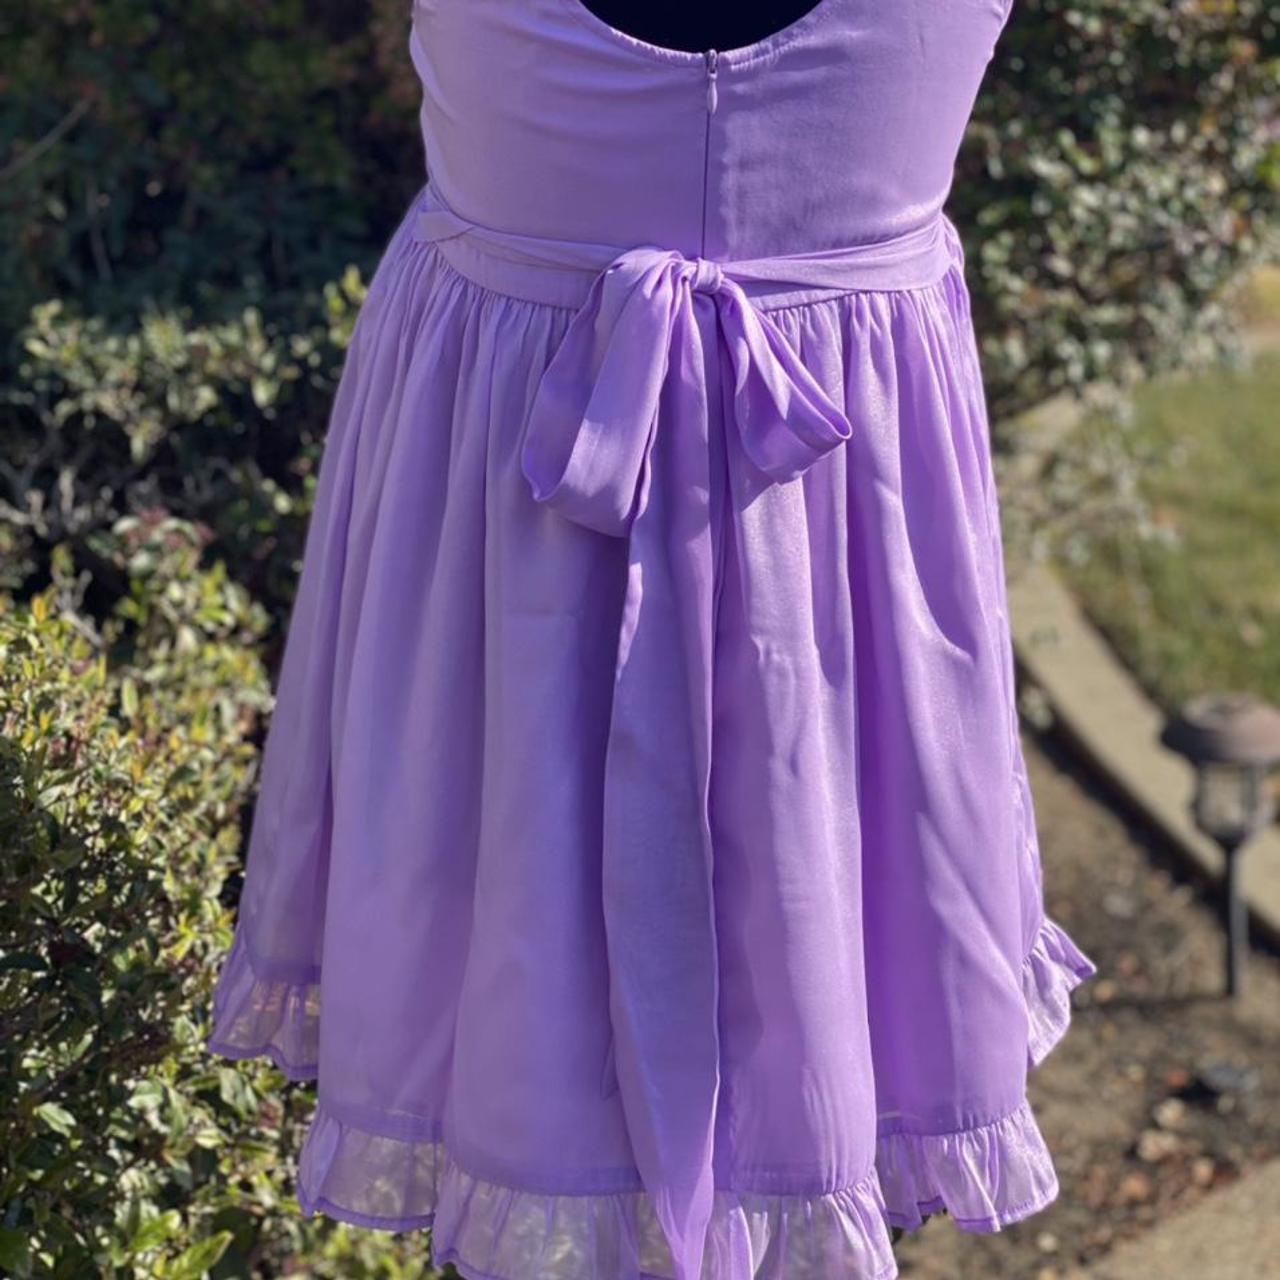 Product Image 3 - Sugar thrillz lavender dress with